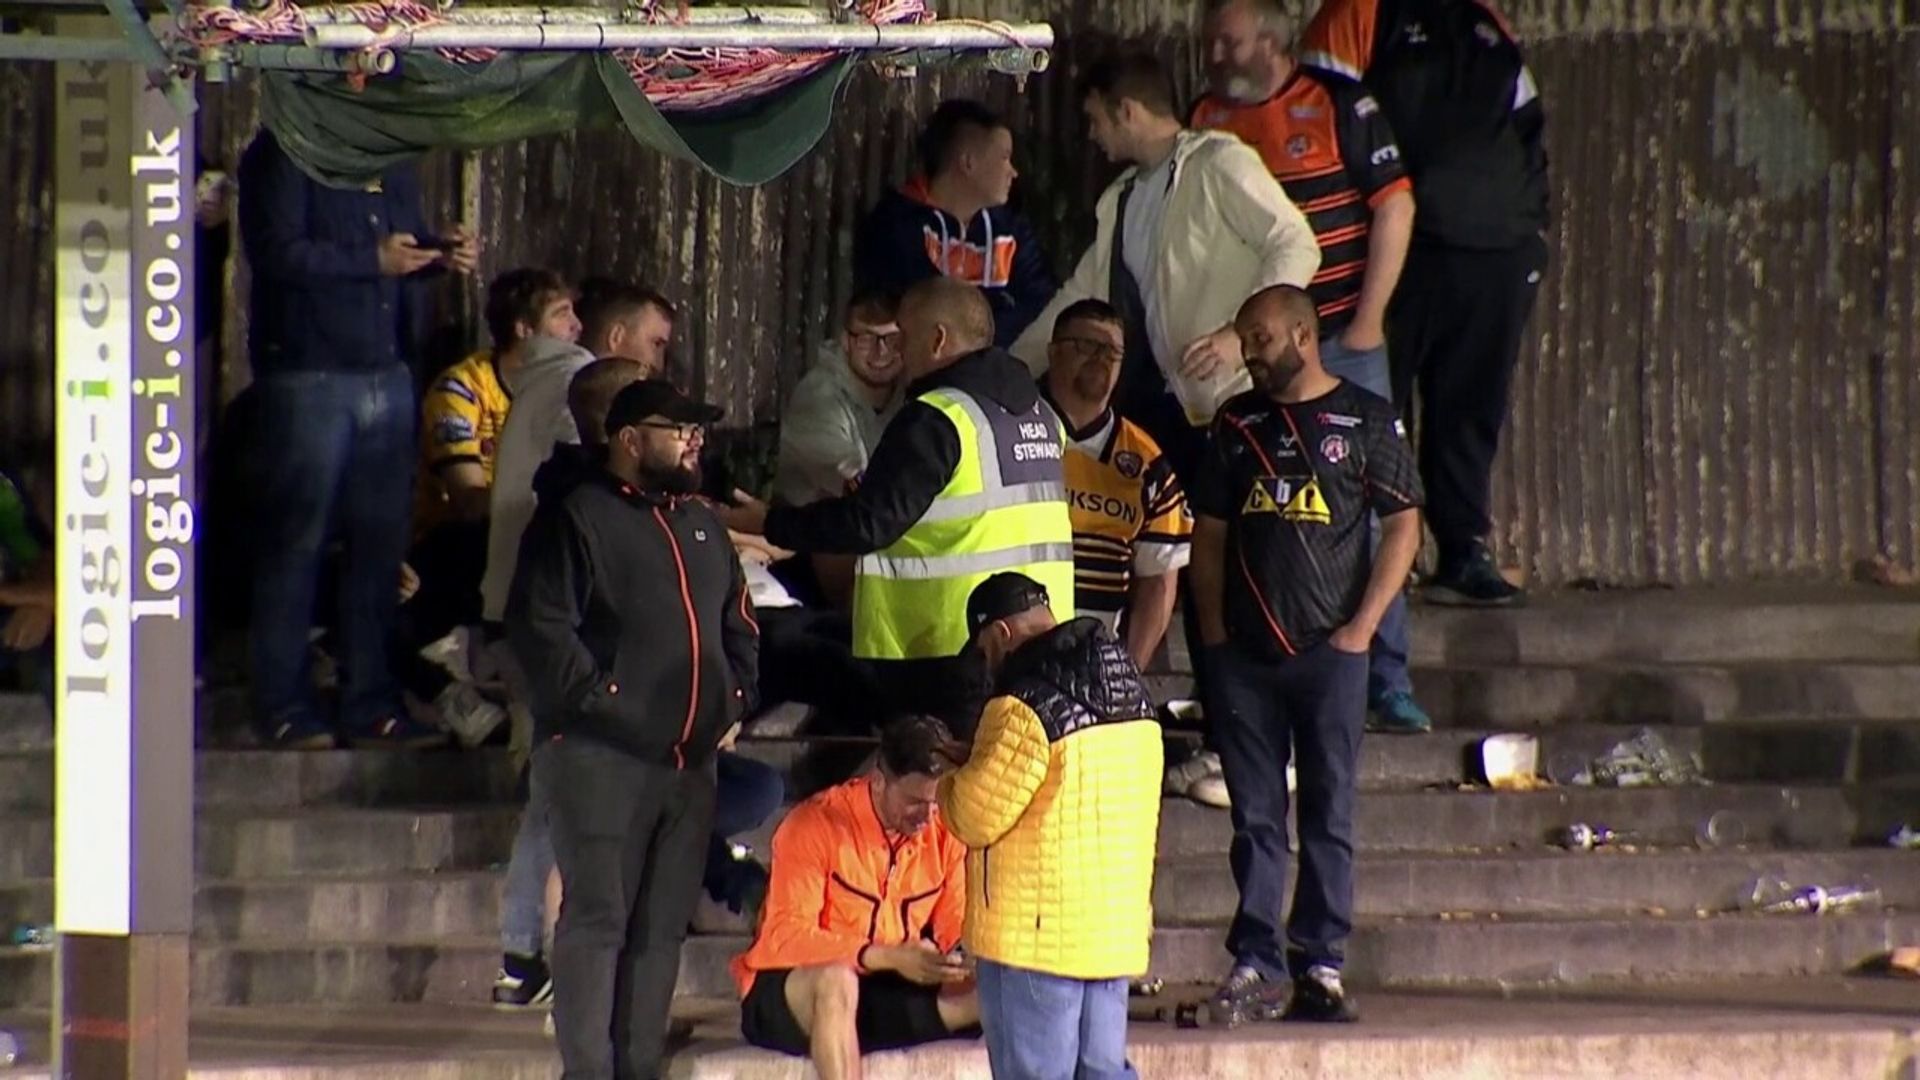 Castleford fans stage protest after loss to Huddersfield